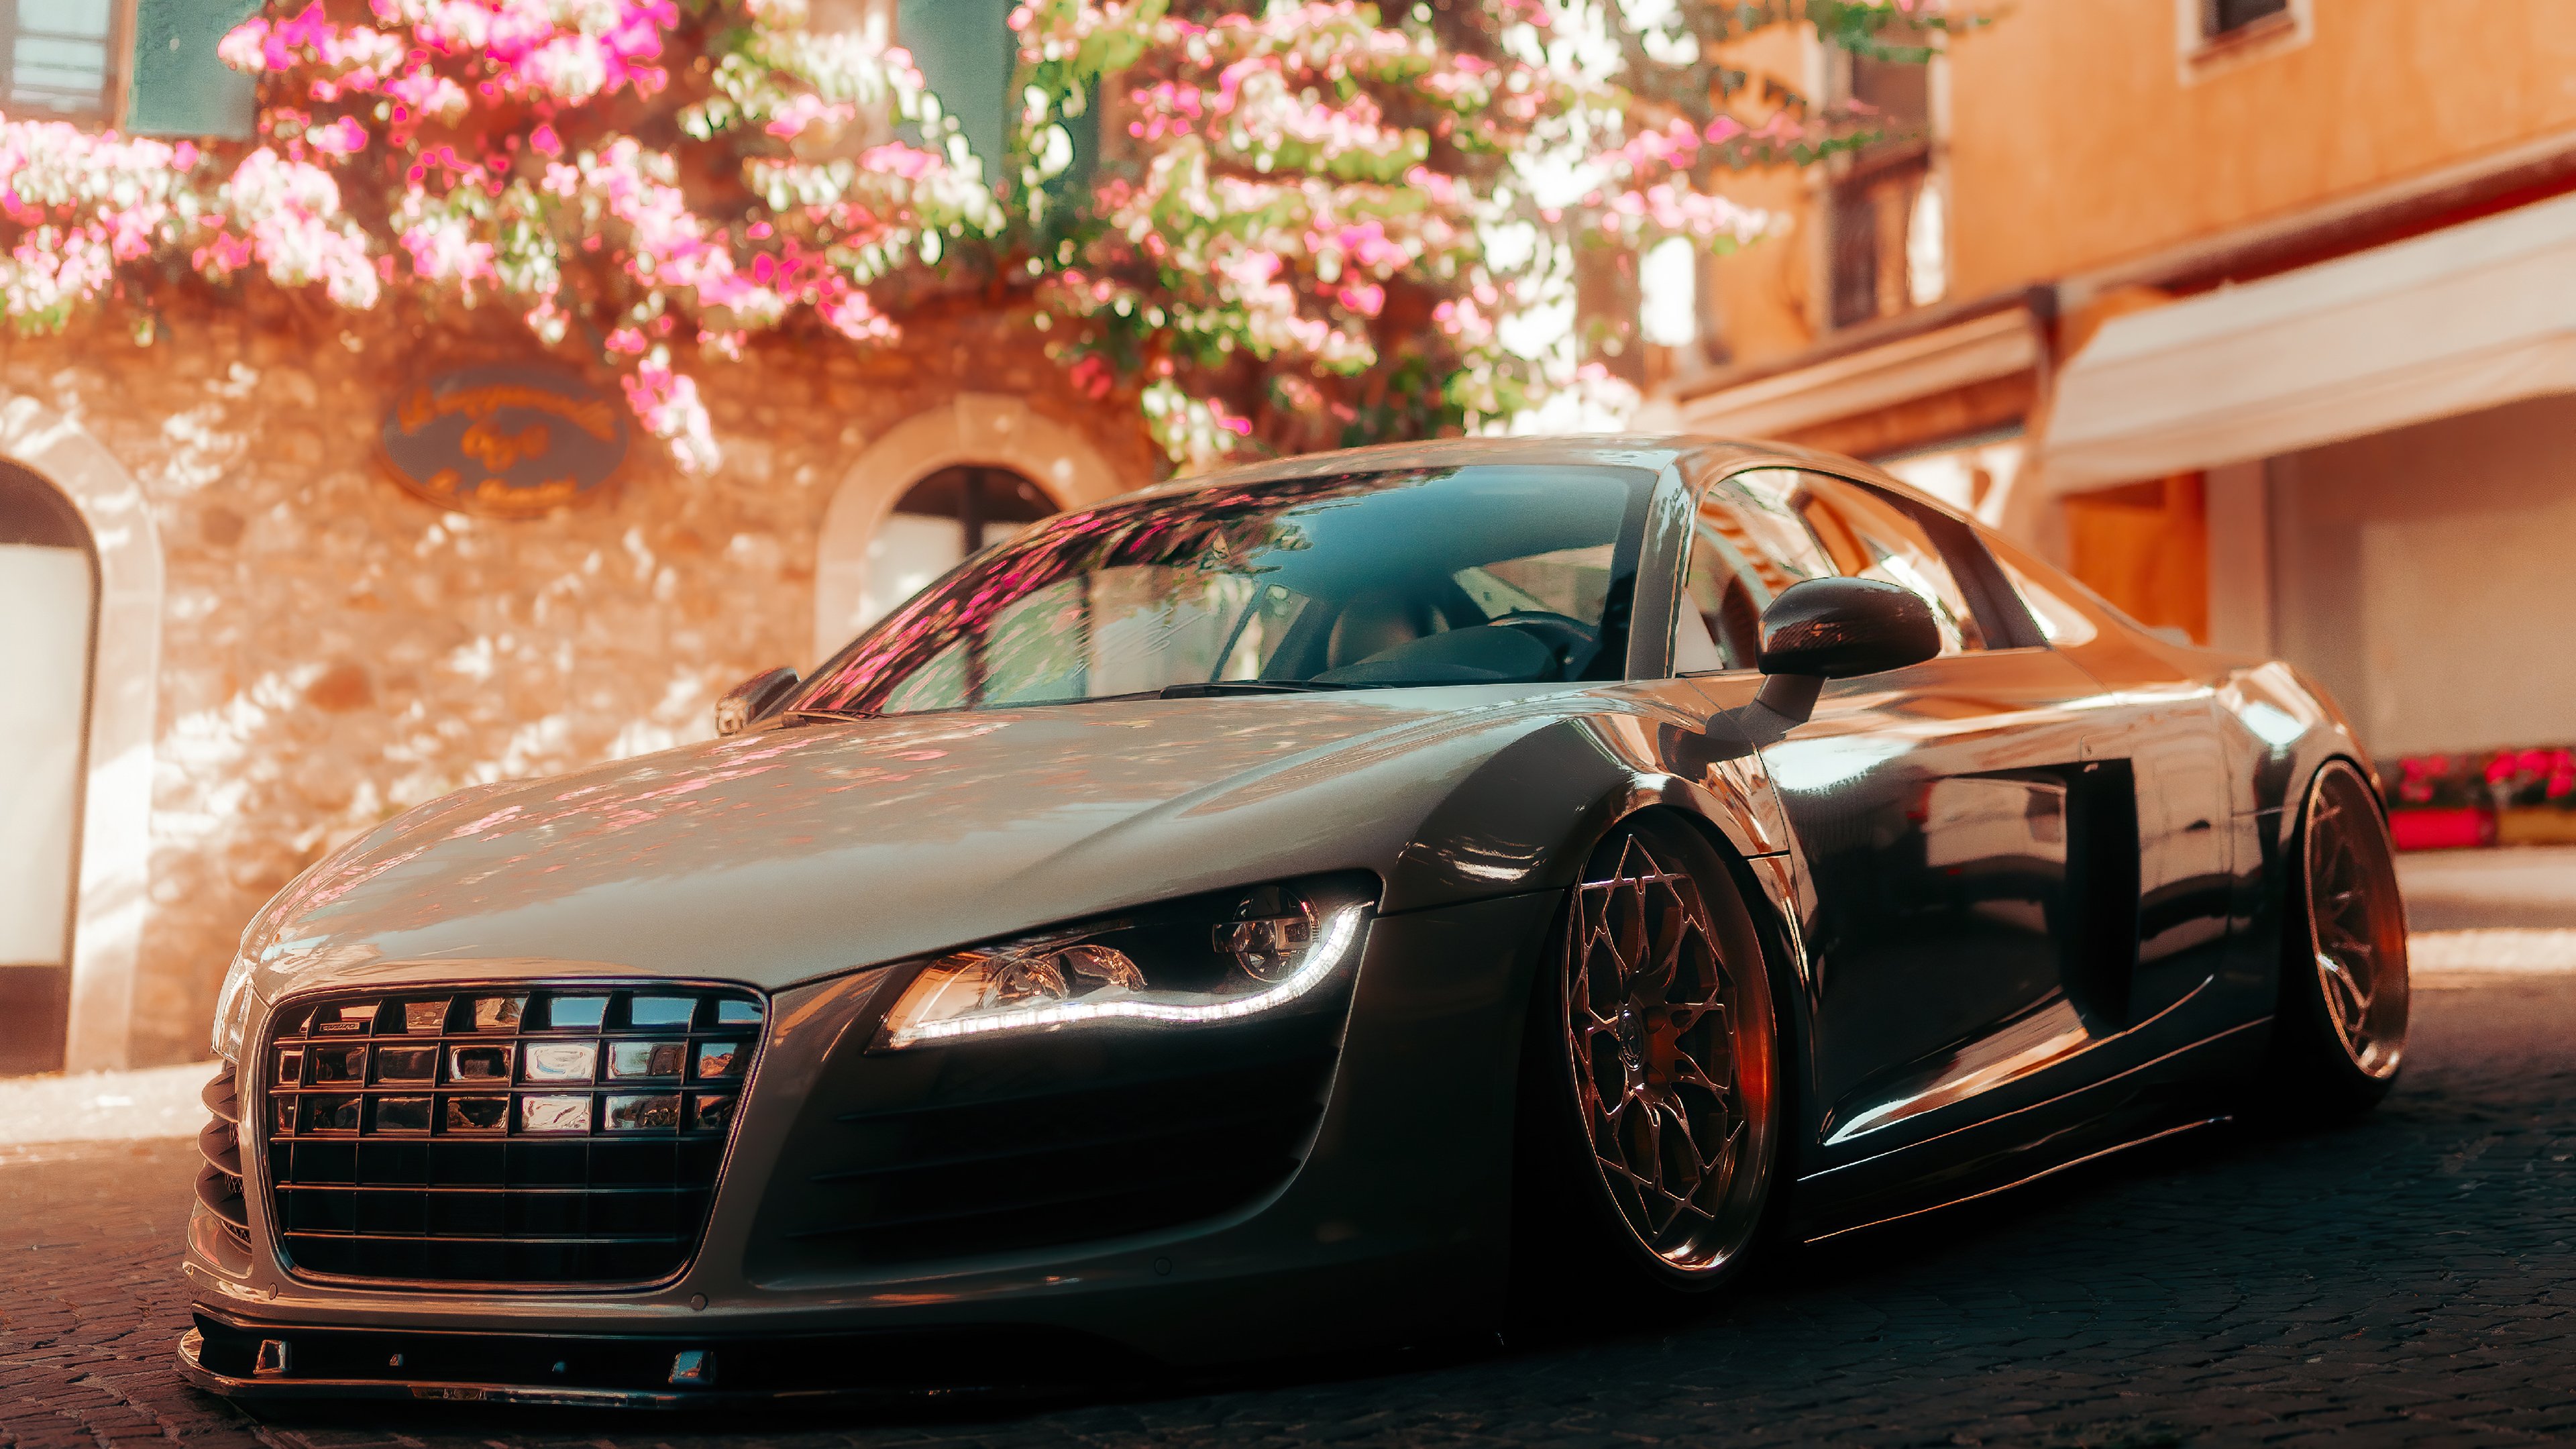 Audi R8 In An Old Italian City 4k, HD Cars, 4k Wallpaper, Image, Background, Photo and Picture